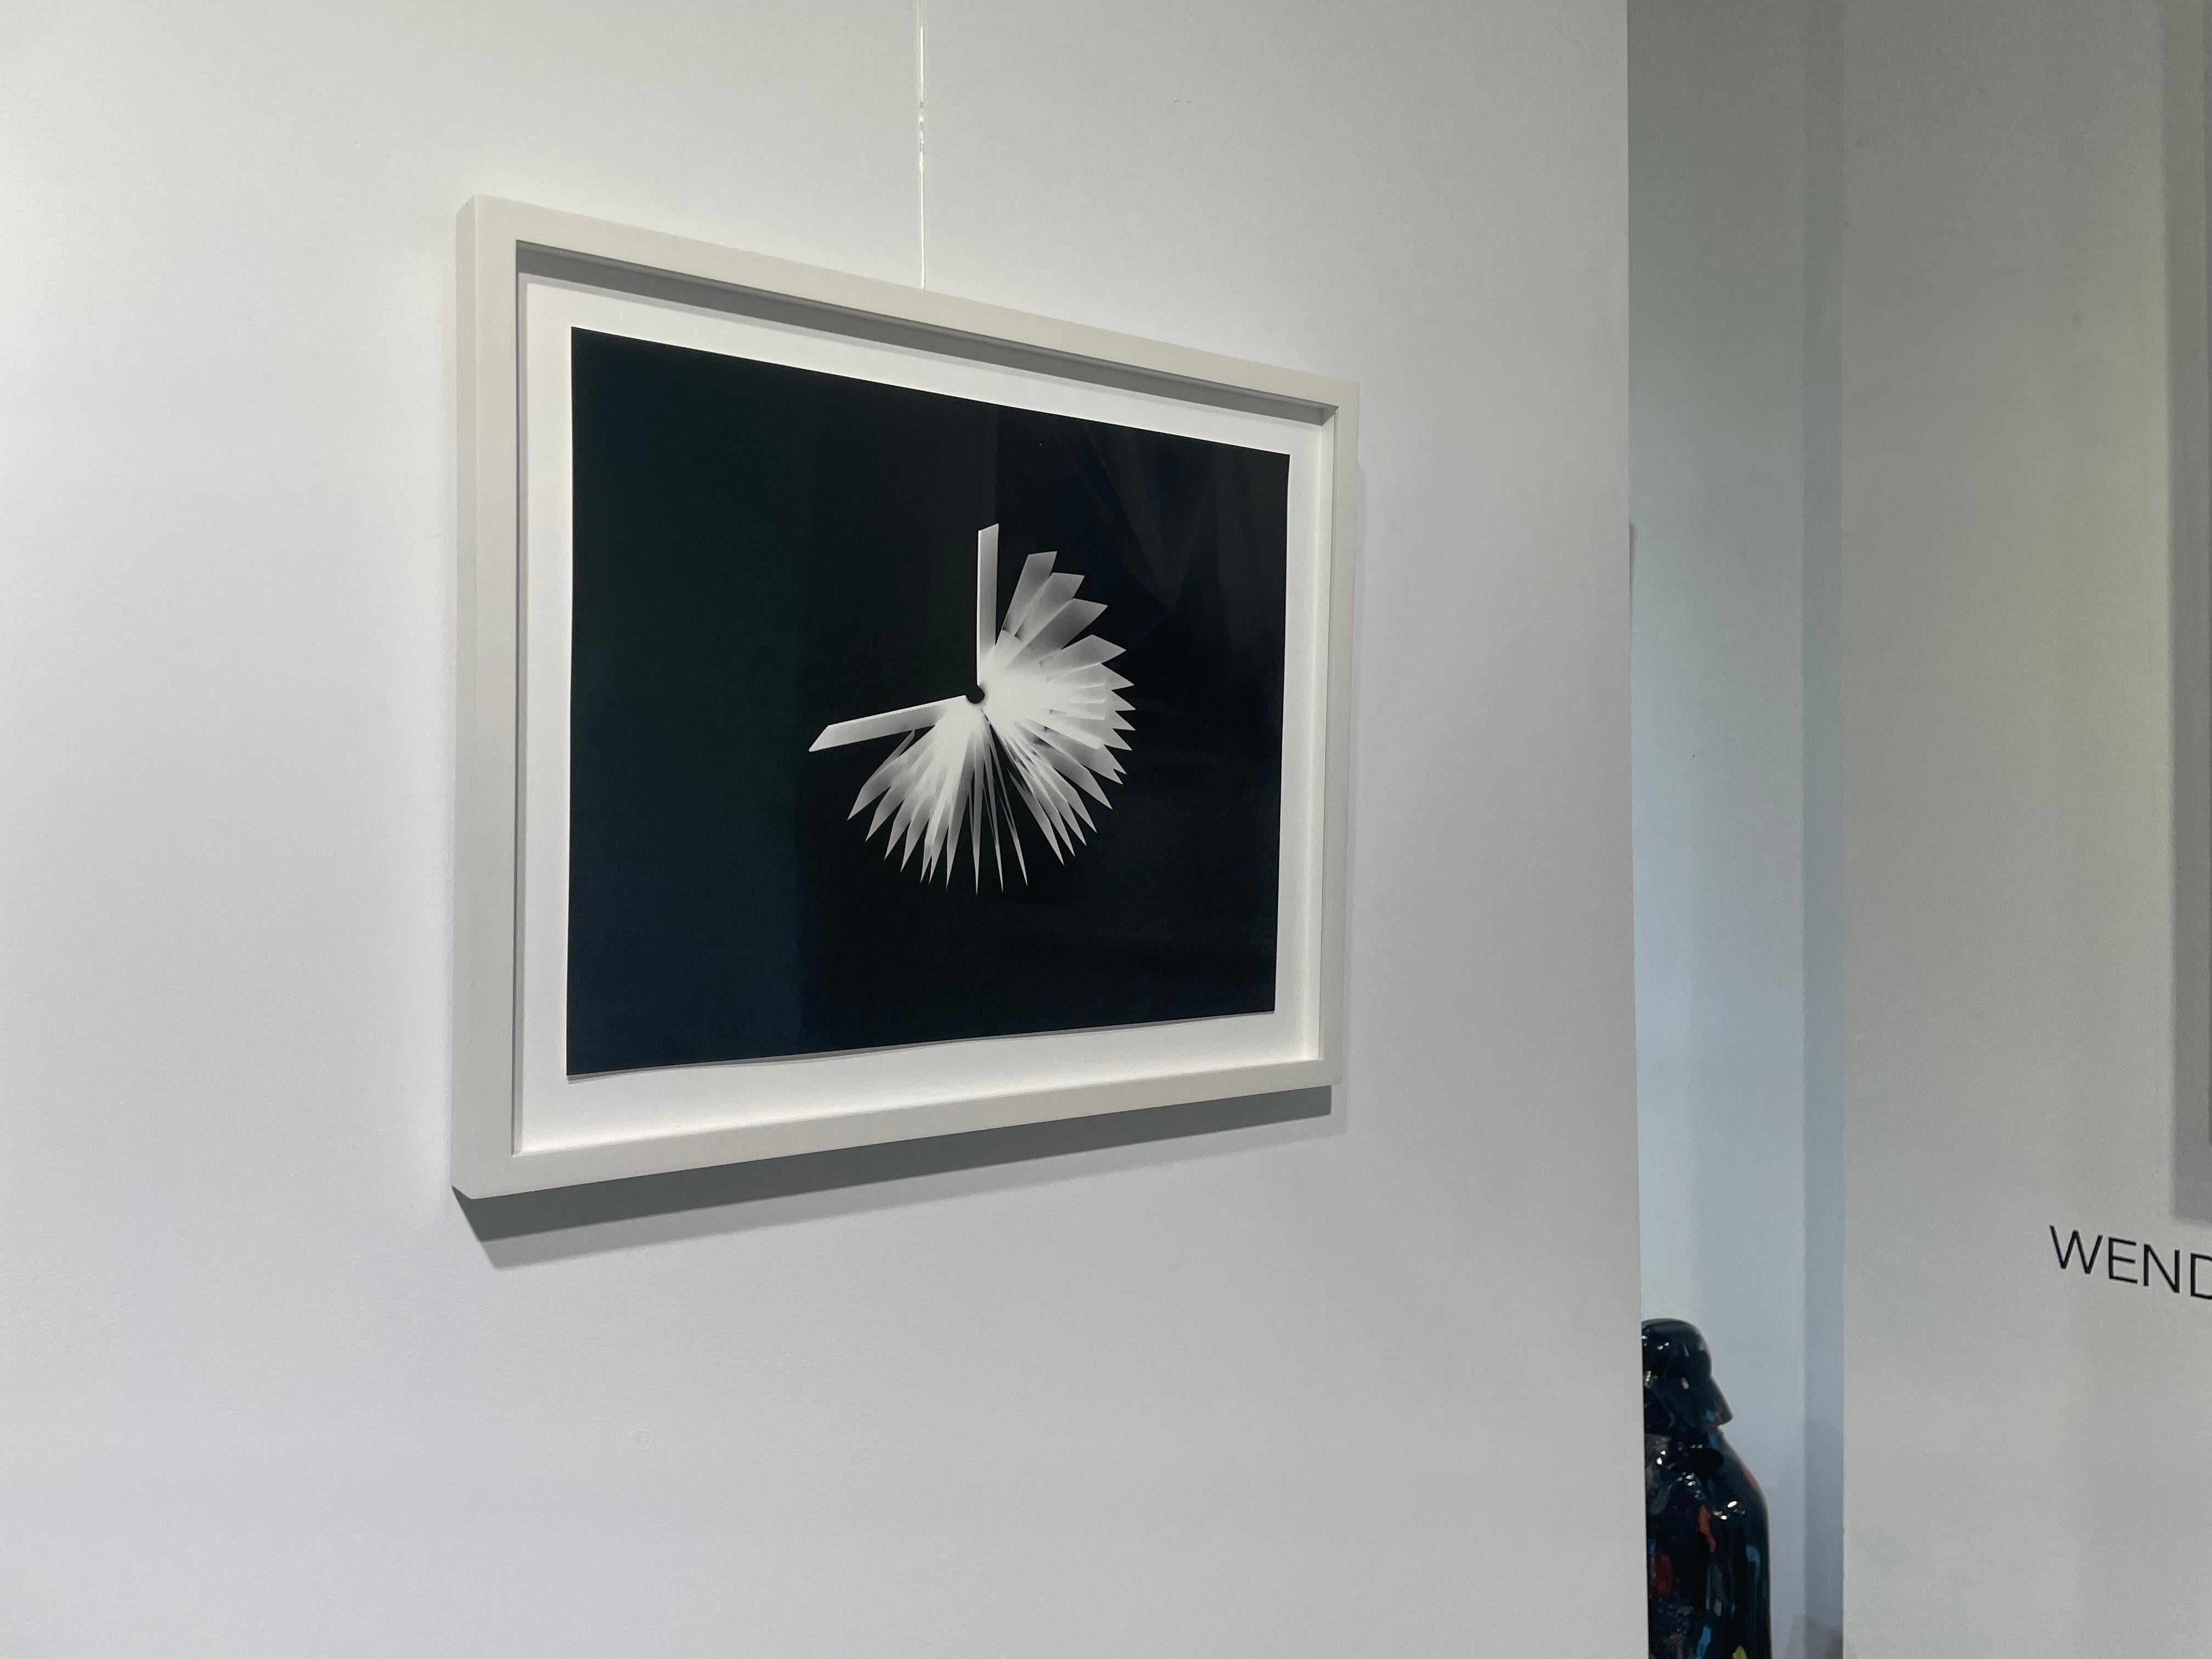 PHOTOGRAMS LITERARY UNITITLED 18 - Photograph by Wendy Paton